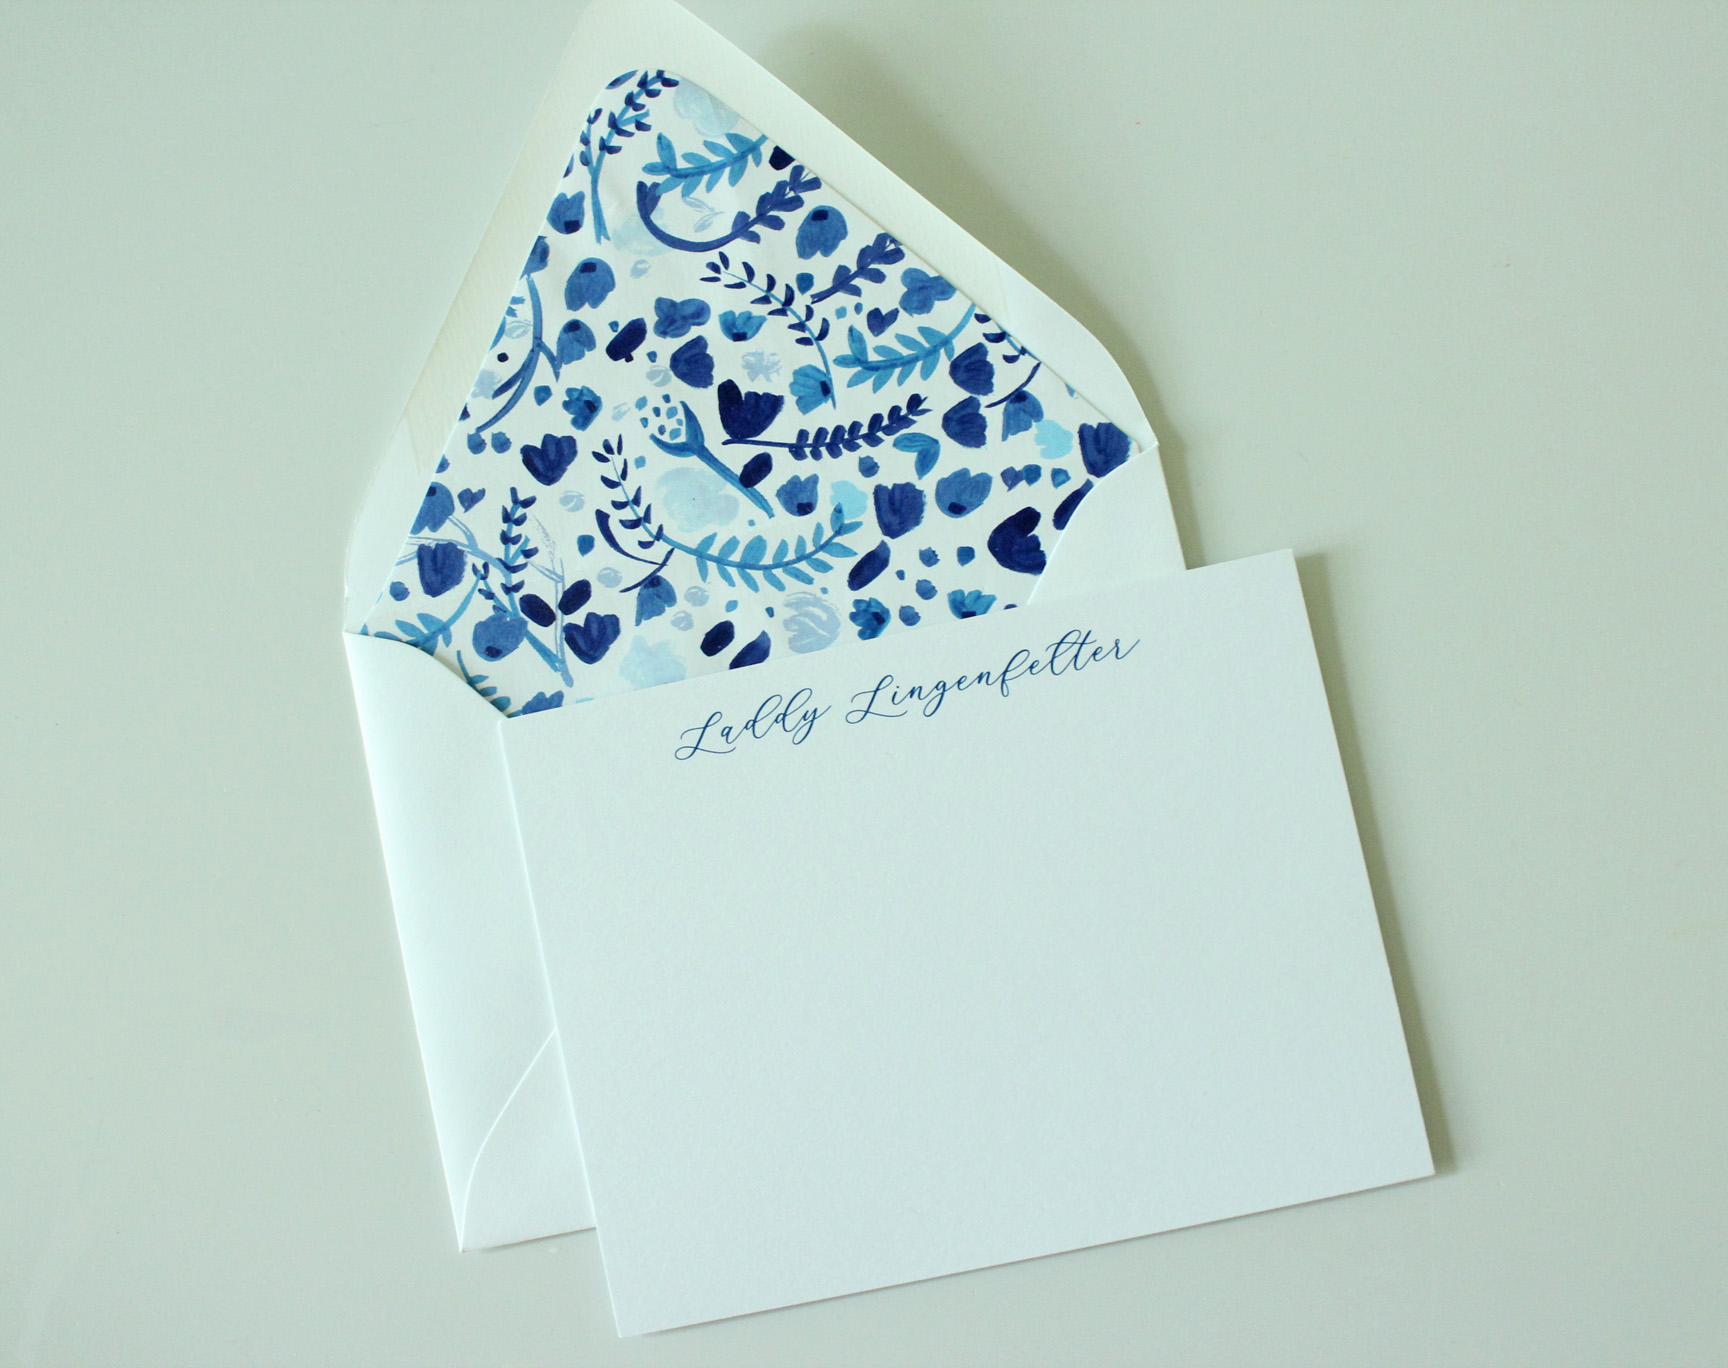 Personalized Notecards - blue watercolor floral %